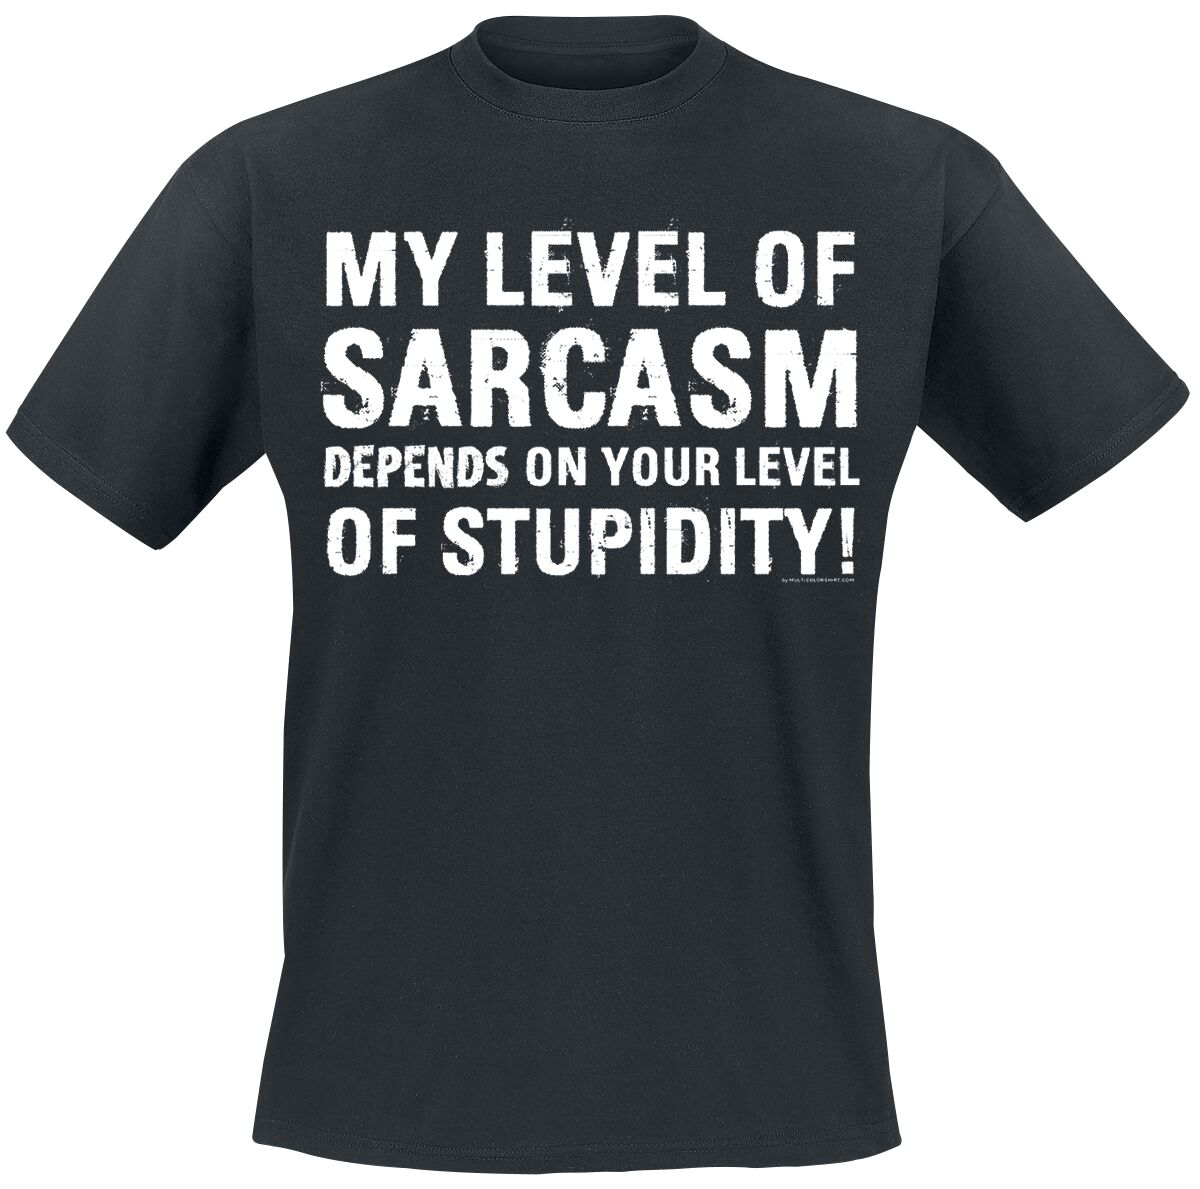 Sprüche My Level Of Sarcasm Depends On Your Level Of Stupidity! T-Shirt schwarz in 4XL